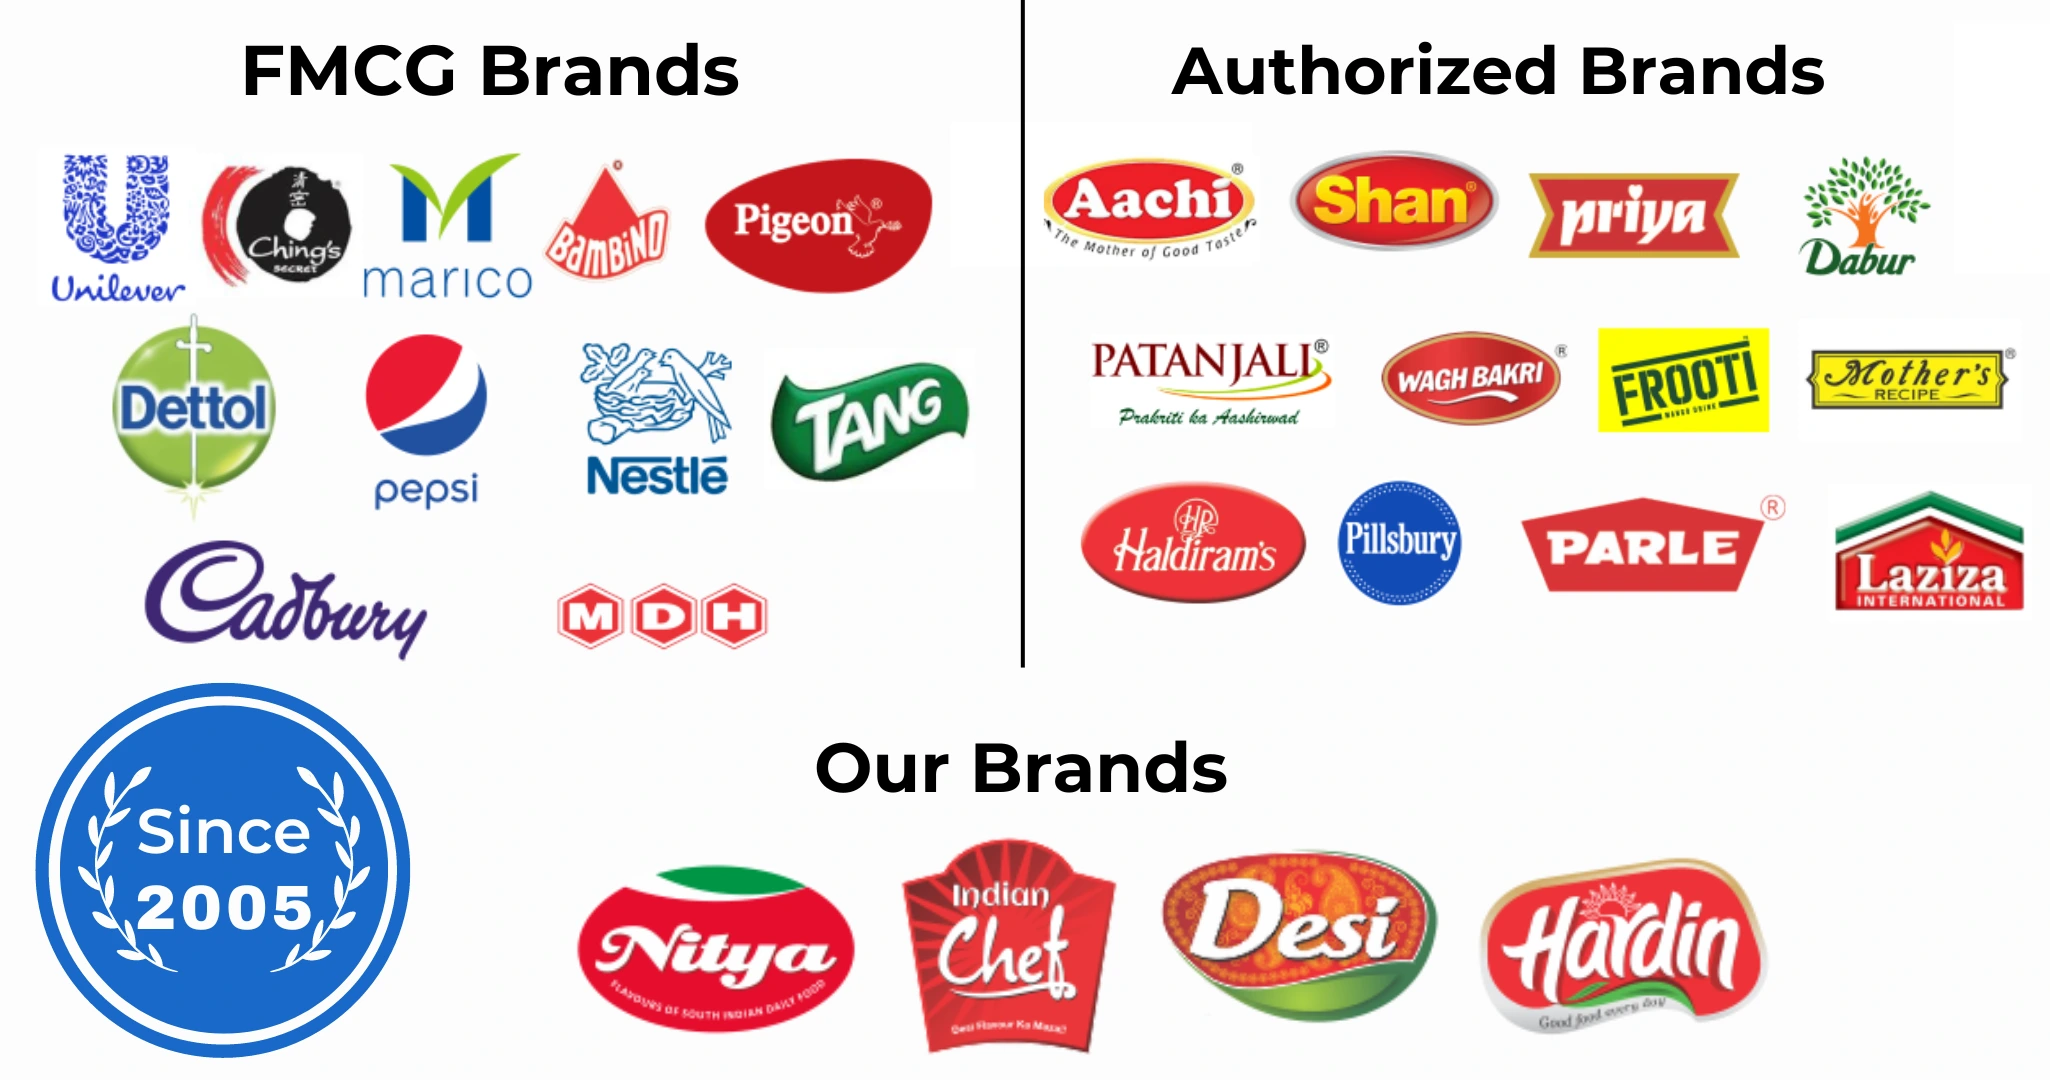 authorized brands, fmcg brands and our brands exporter, distributor and supplier